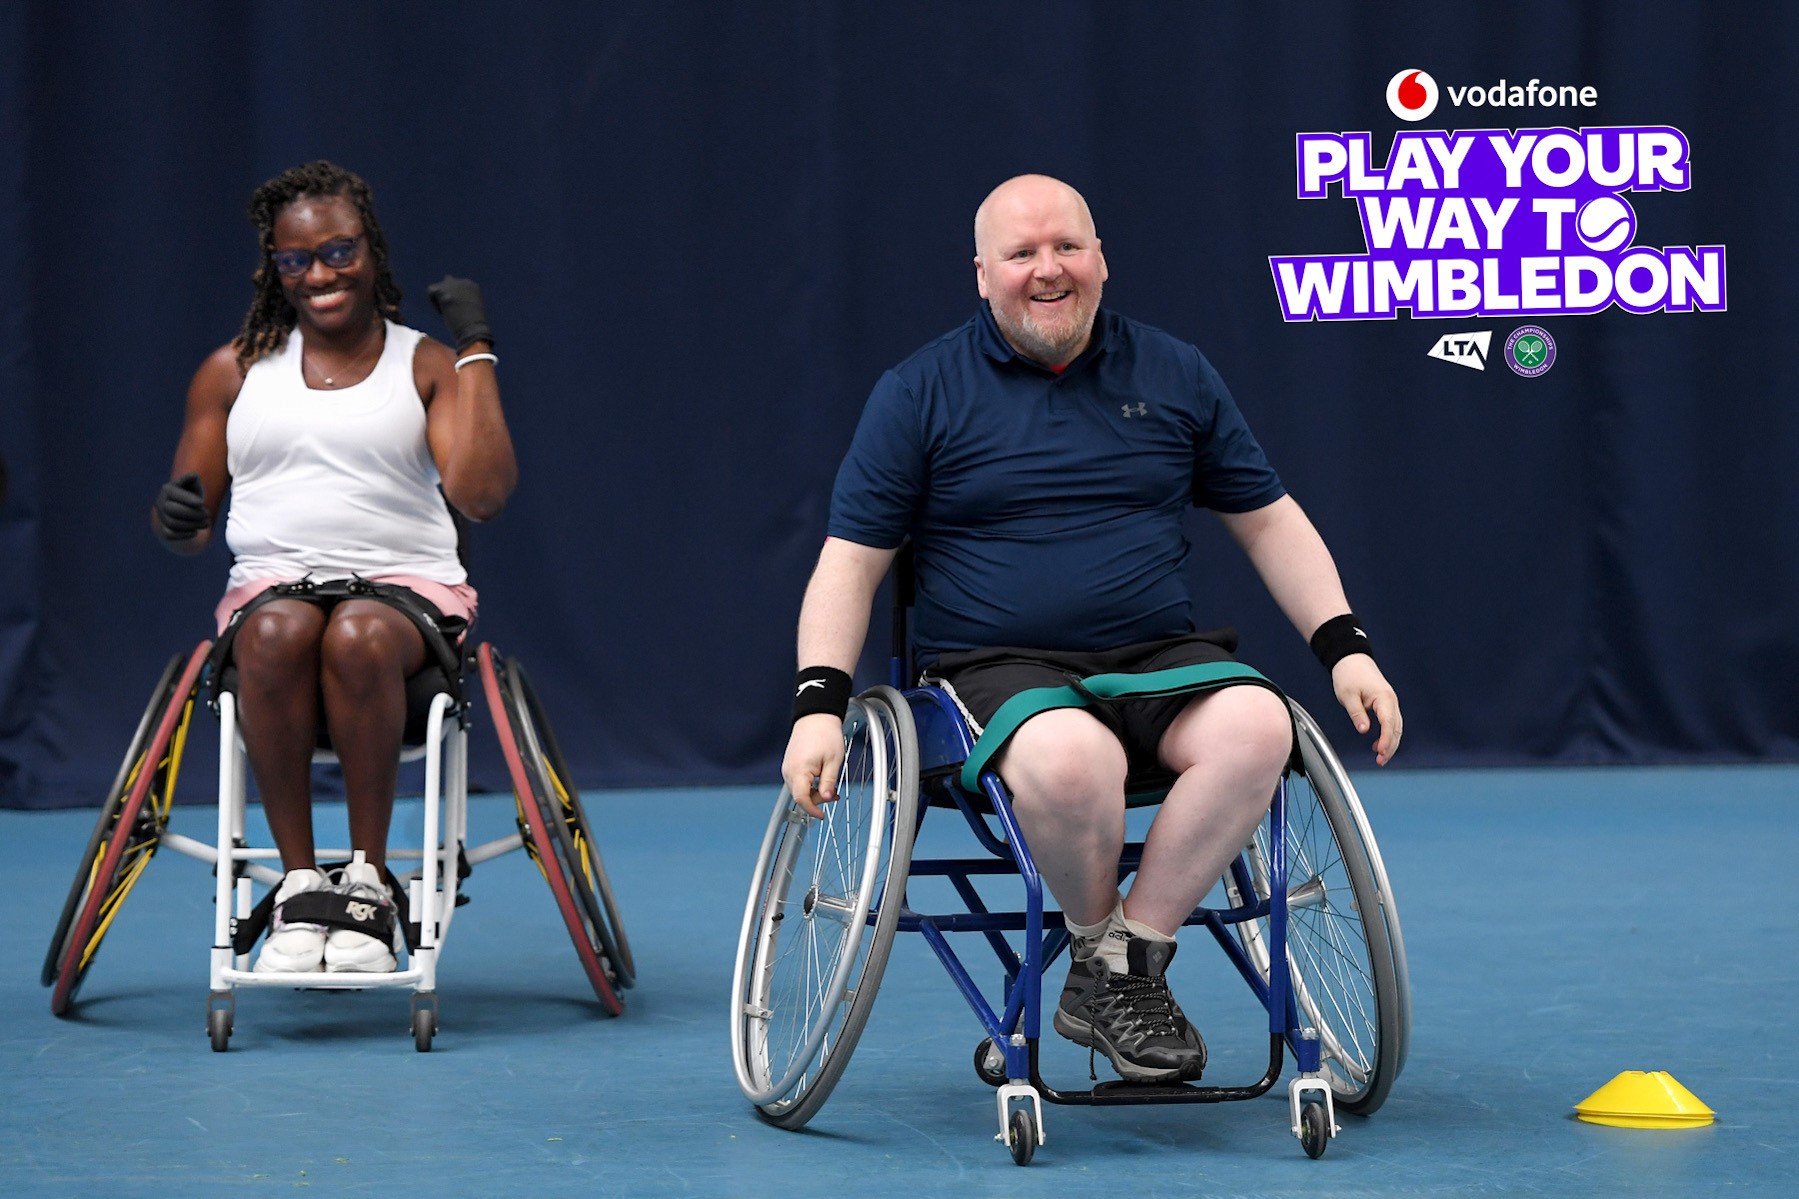 Play Your Way to Wimbledon photo showing two wheelchair tennis players on court